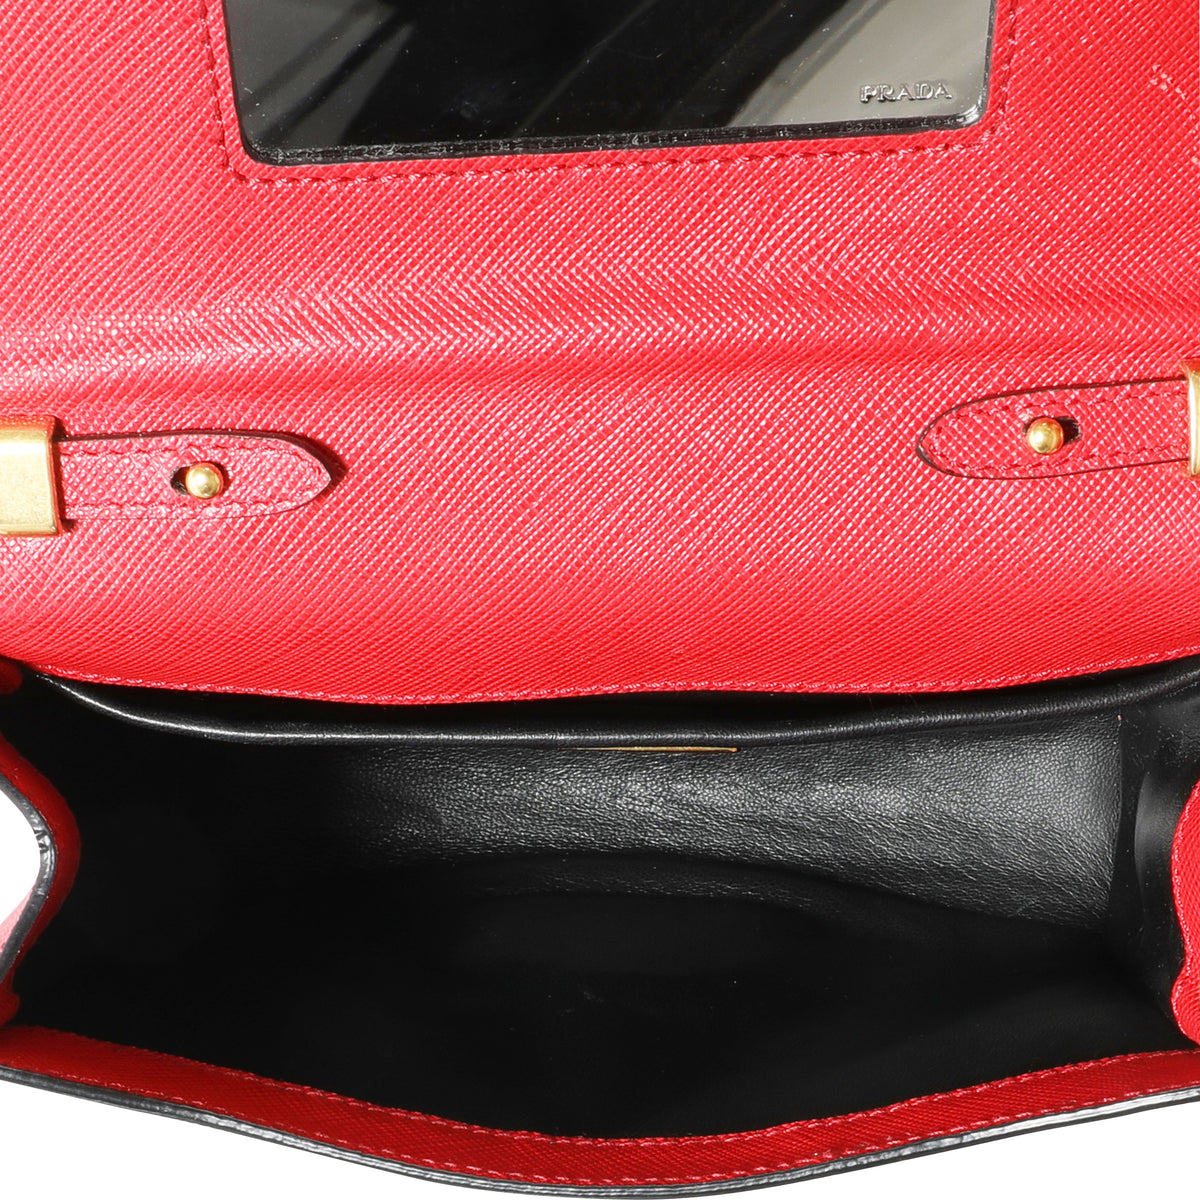 Black/fiery Red Small Saffiano Leather Double Prada Bag